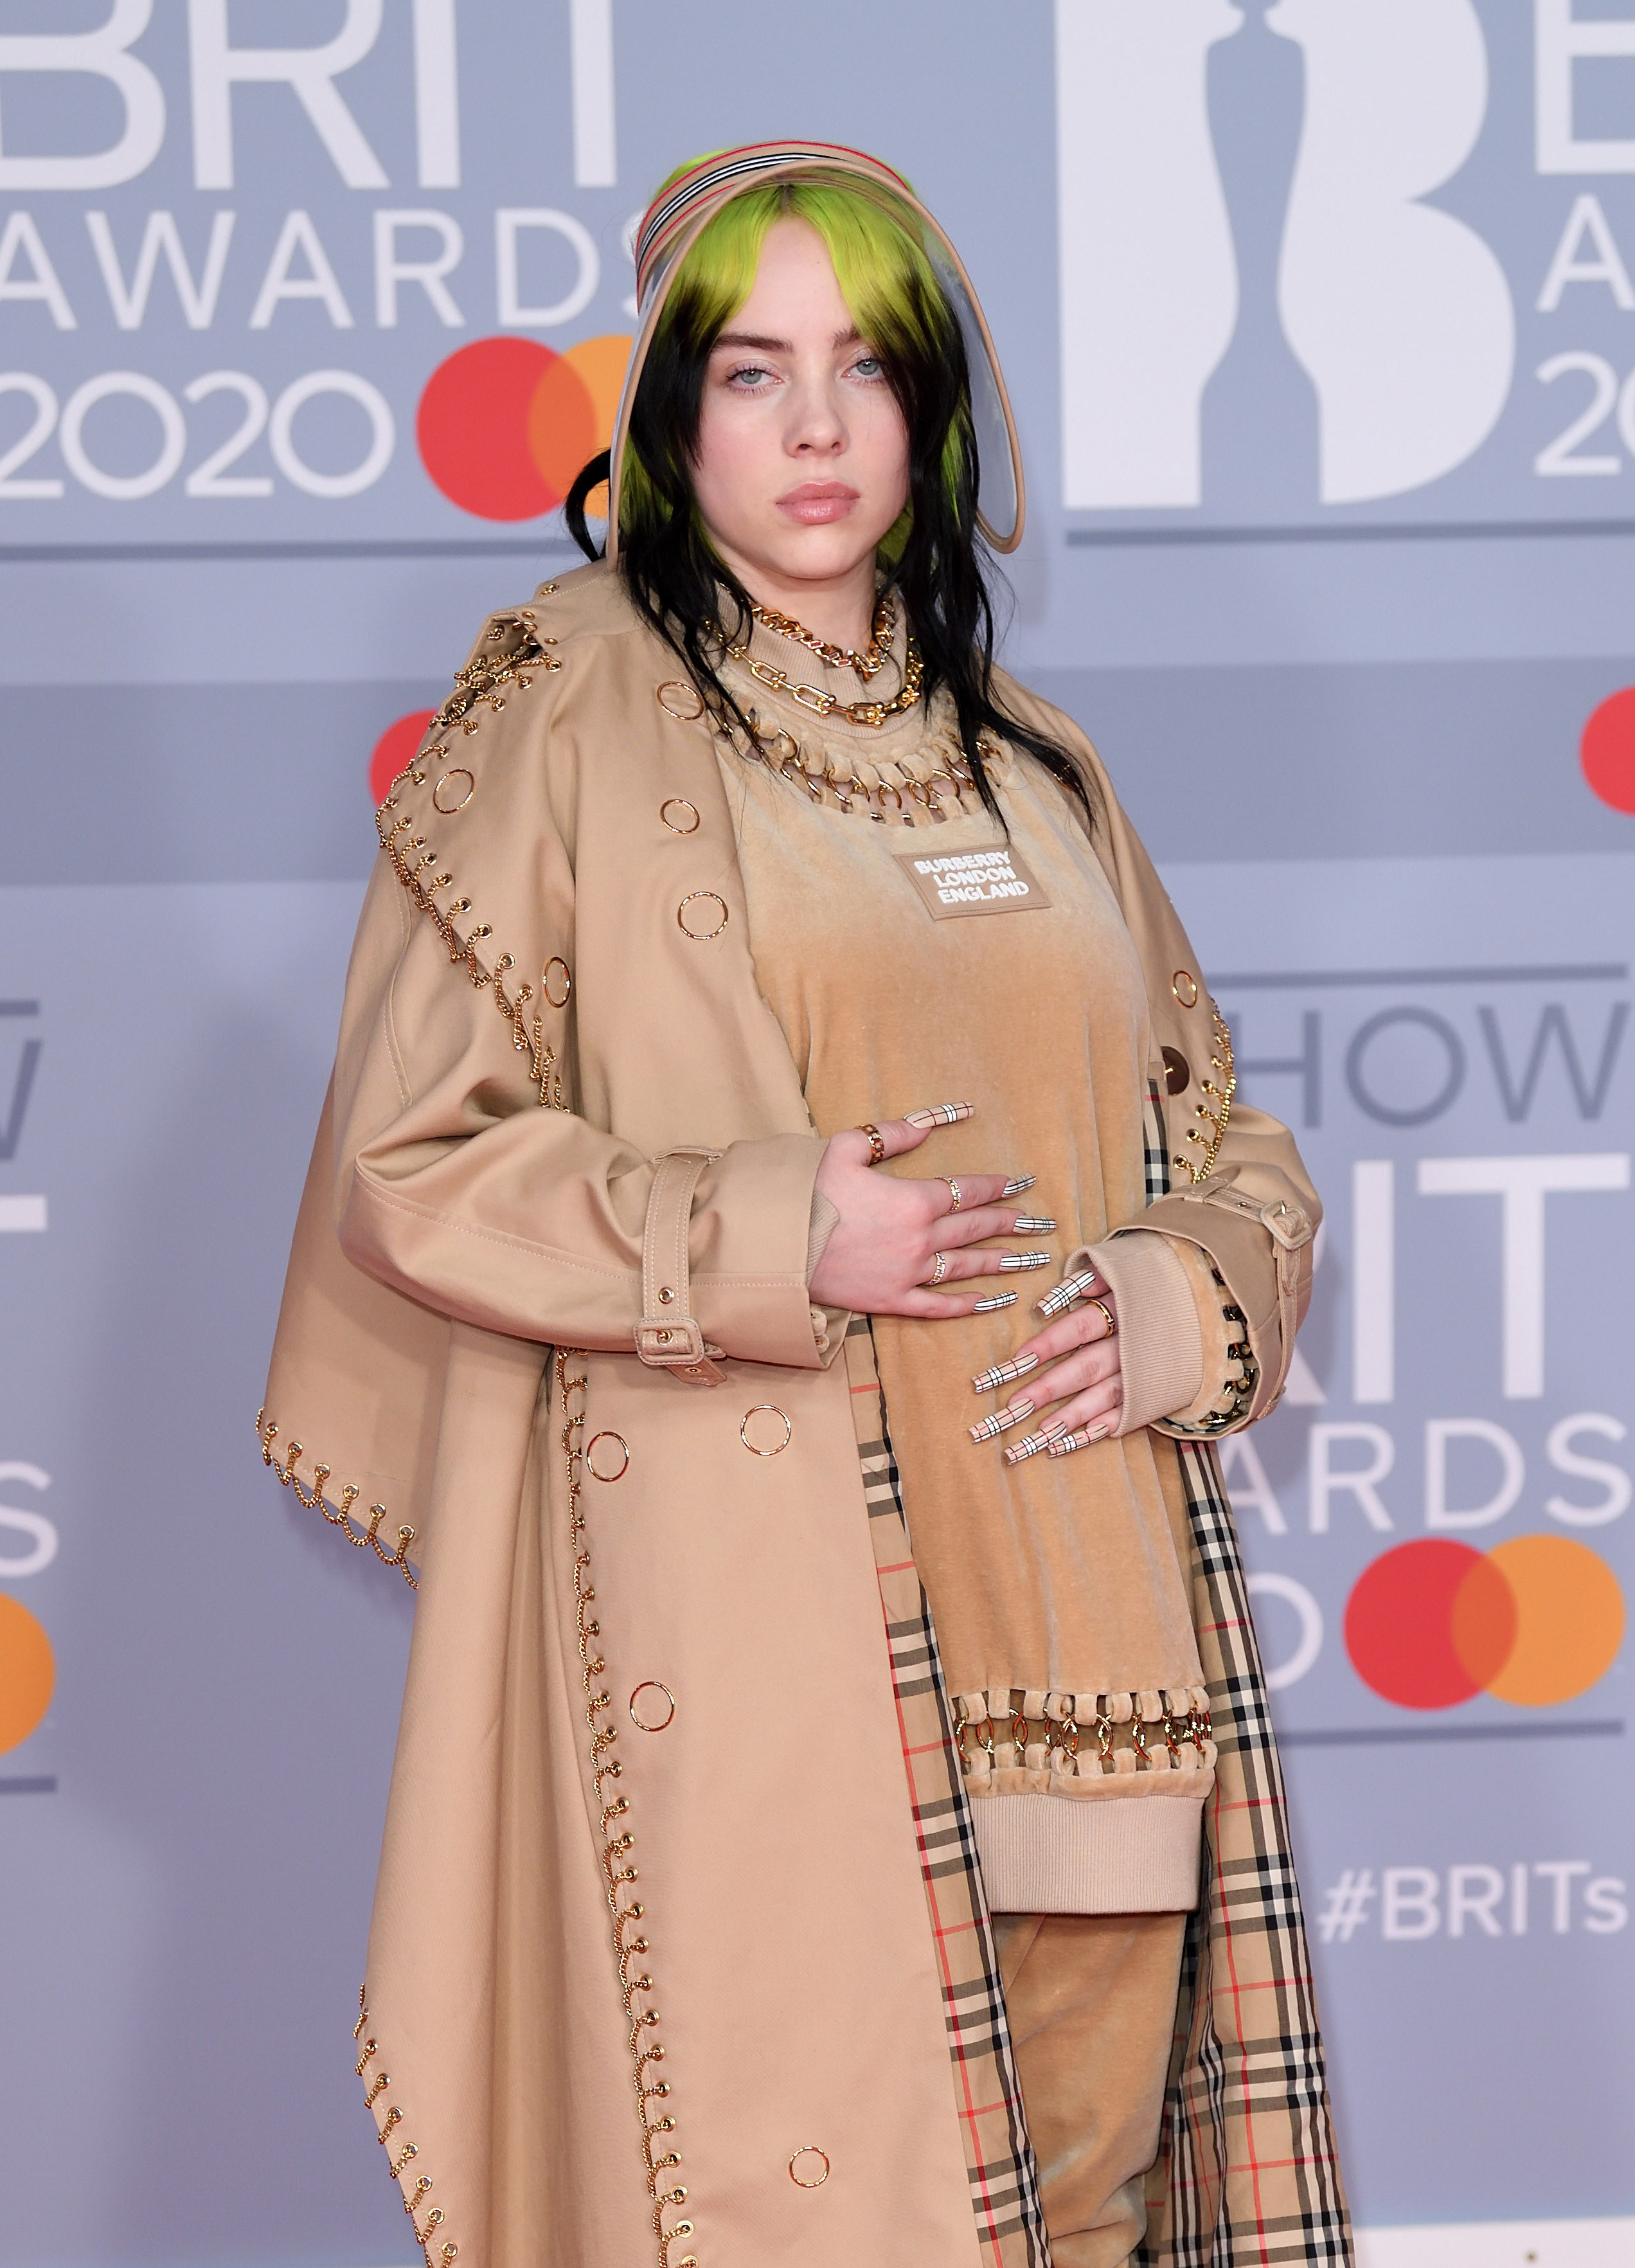 Billie on the red carpet in a loose trench coat